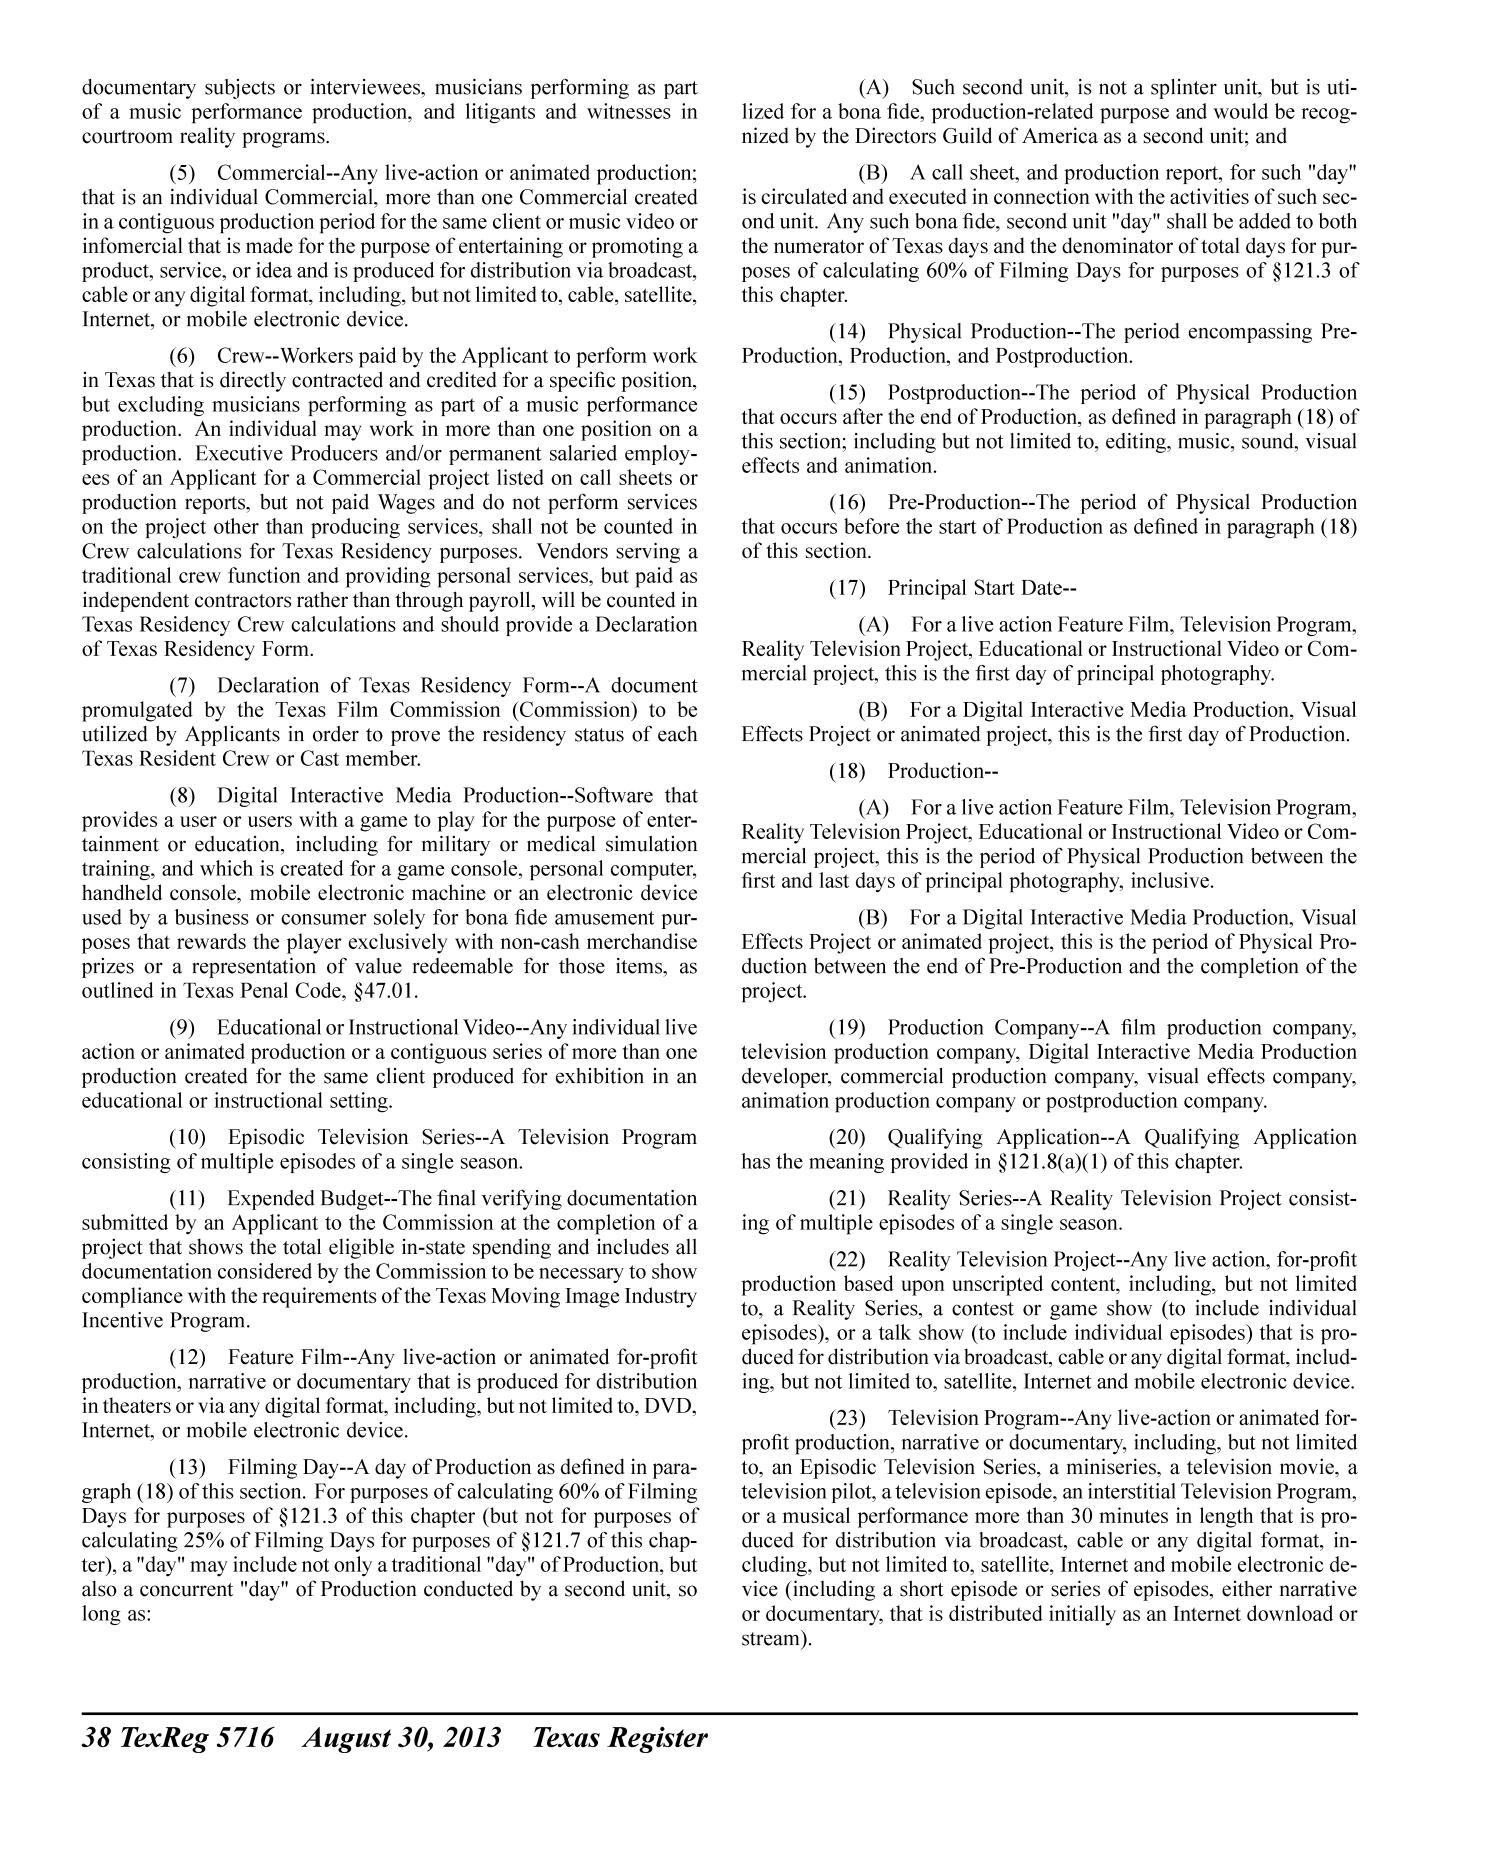 Texas Register, Volume 38, Number 35, Pages 5587-5800, August 30, 2013
                                                
                                                    5716
                                                